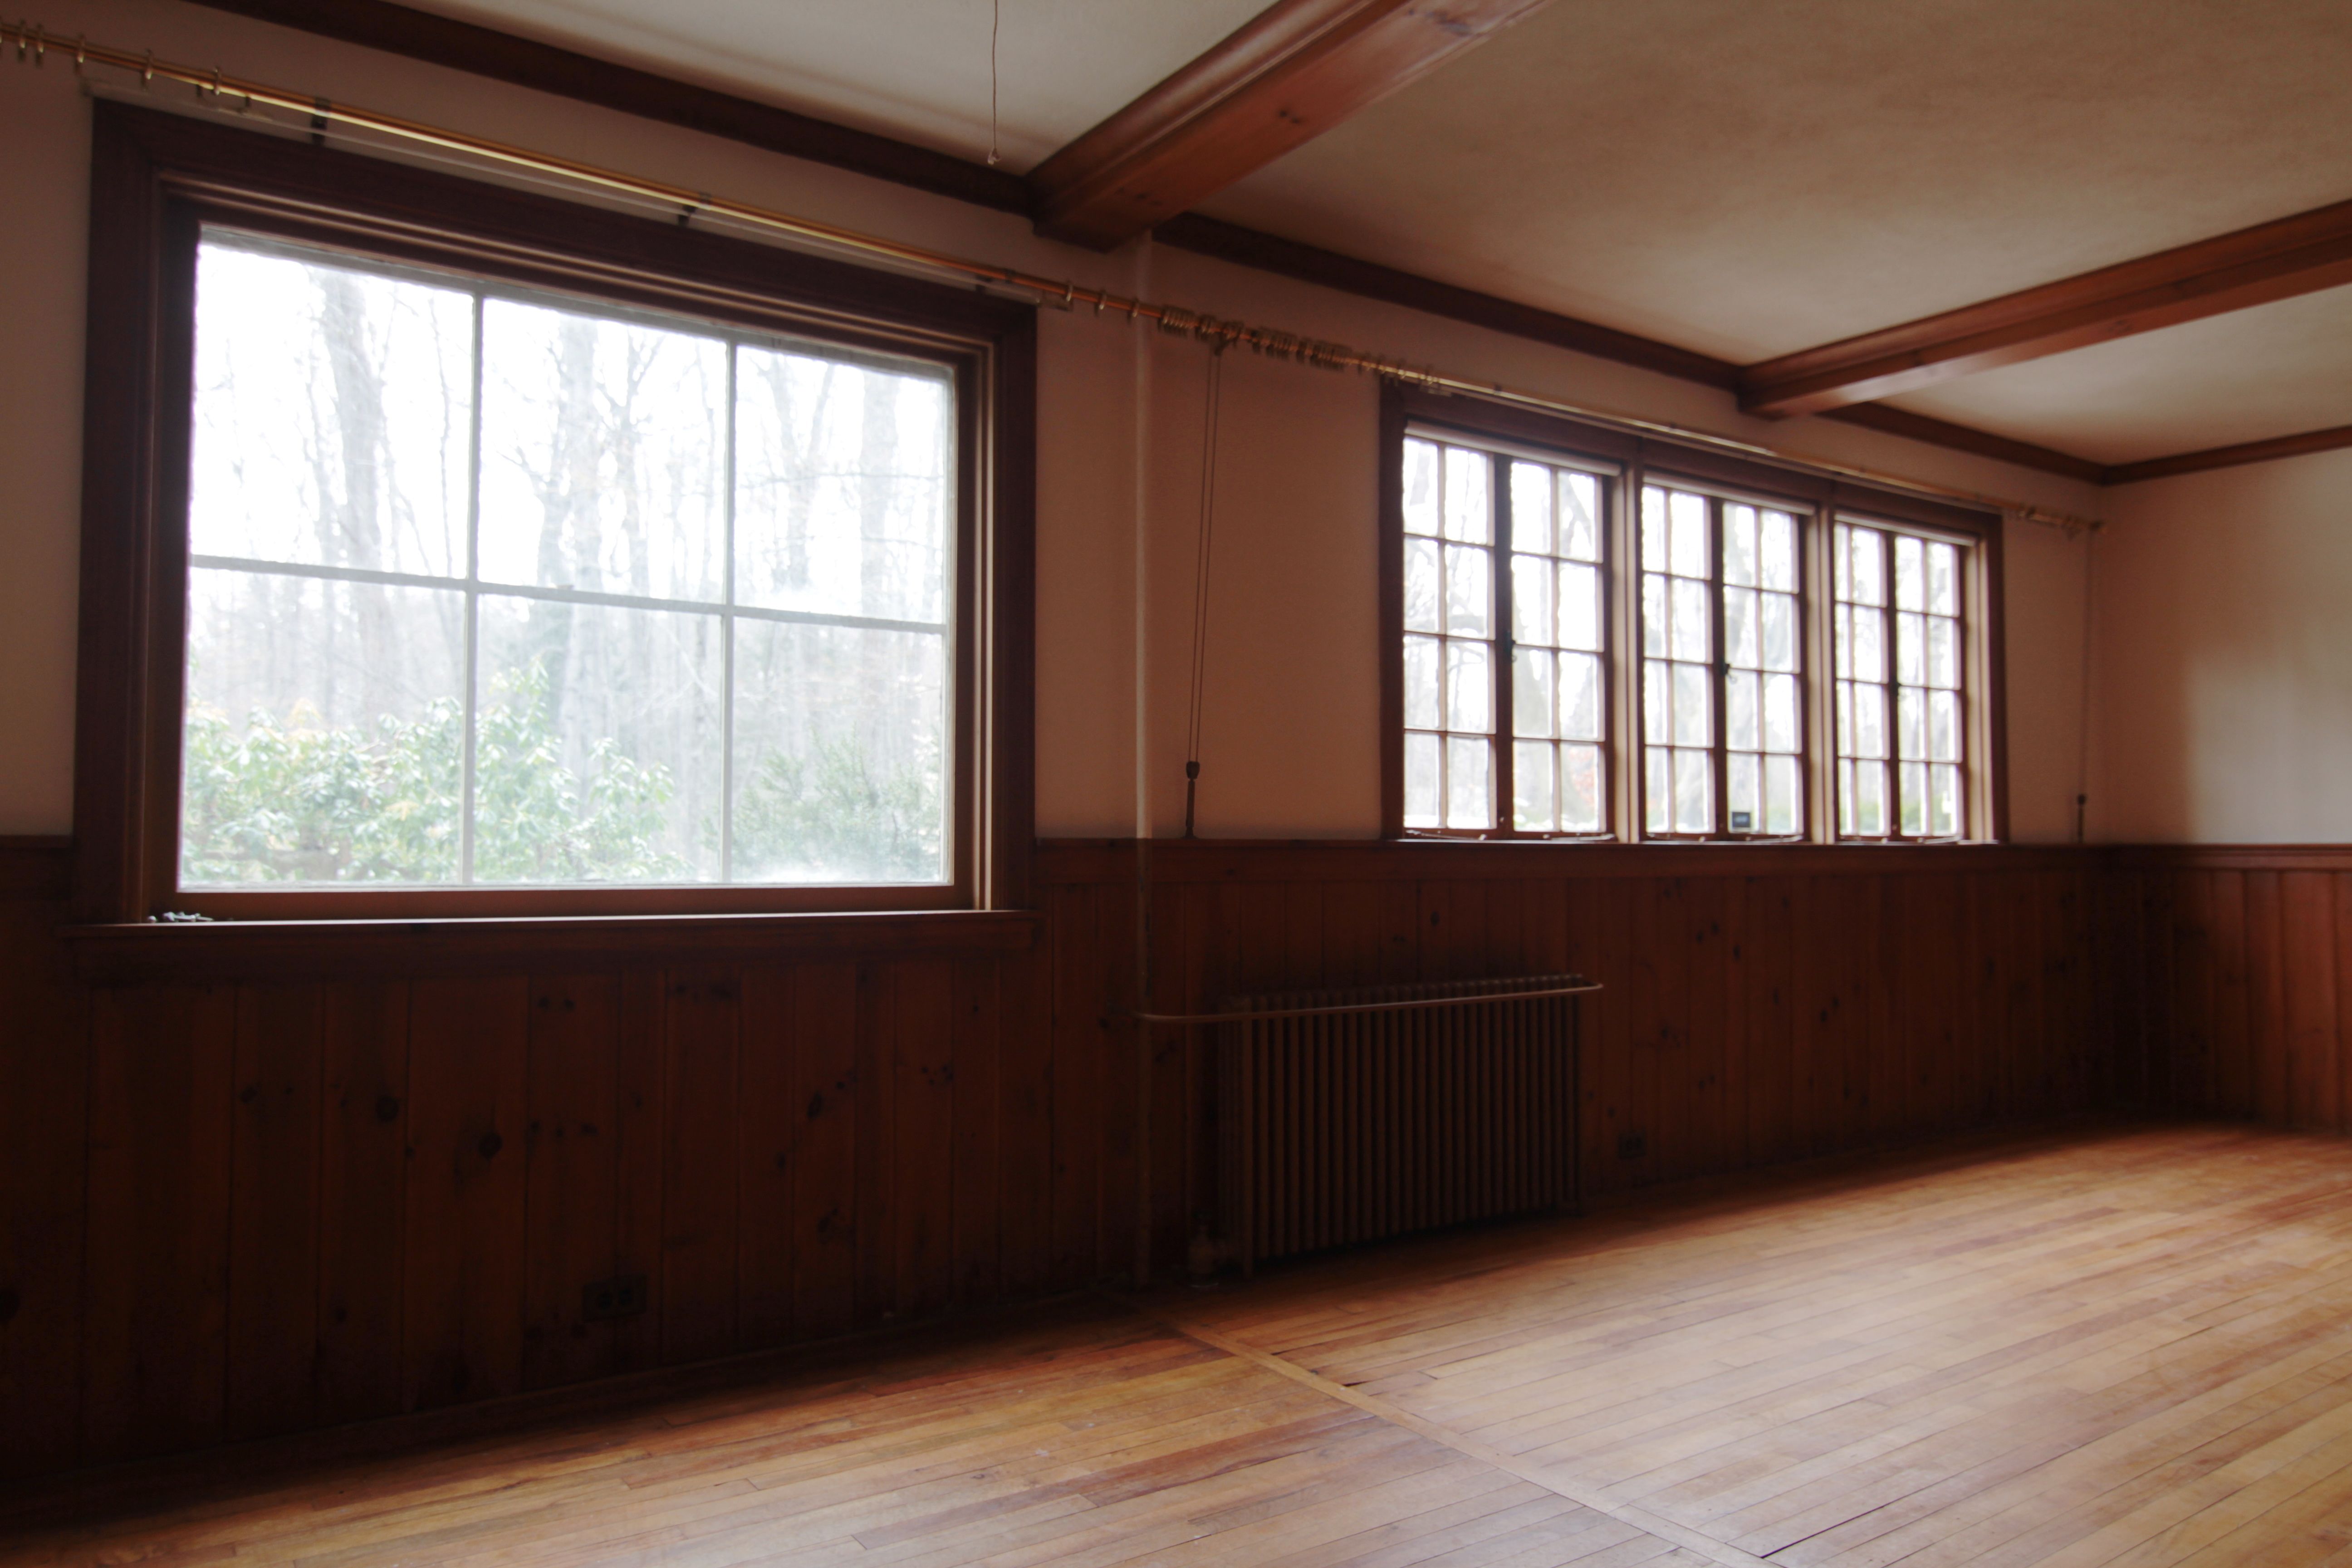 BEFORE: Views onto a wooded park, and lots of character in real wood paneling and faux beams. So English, right?